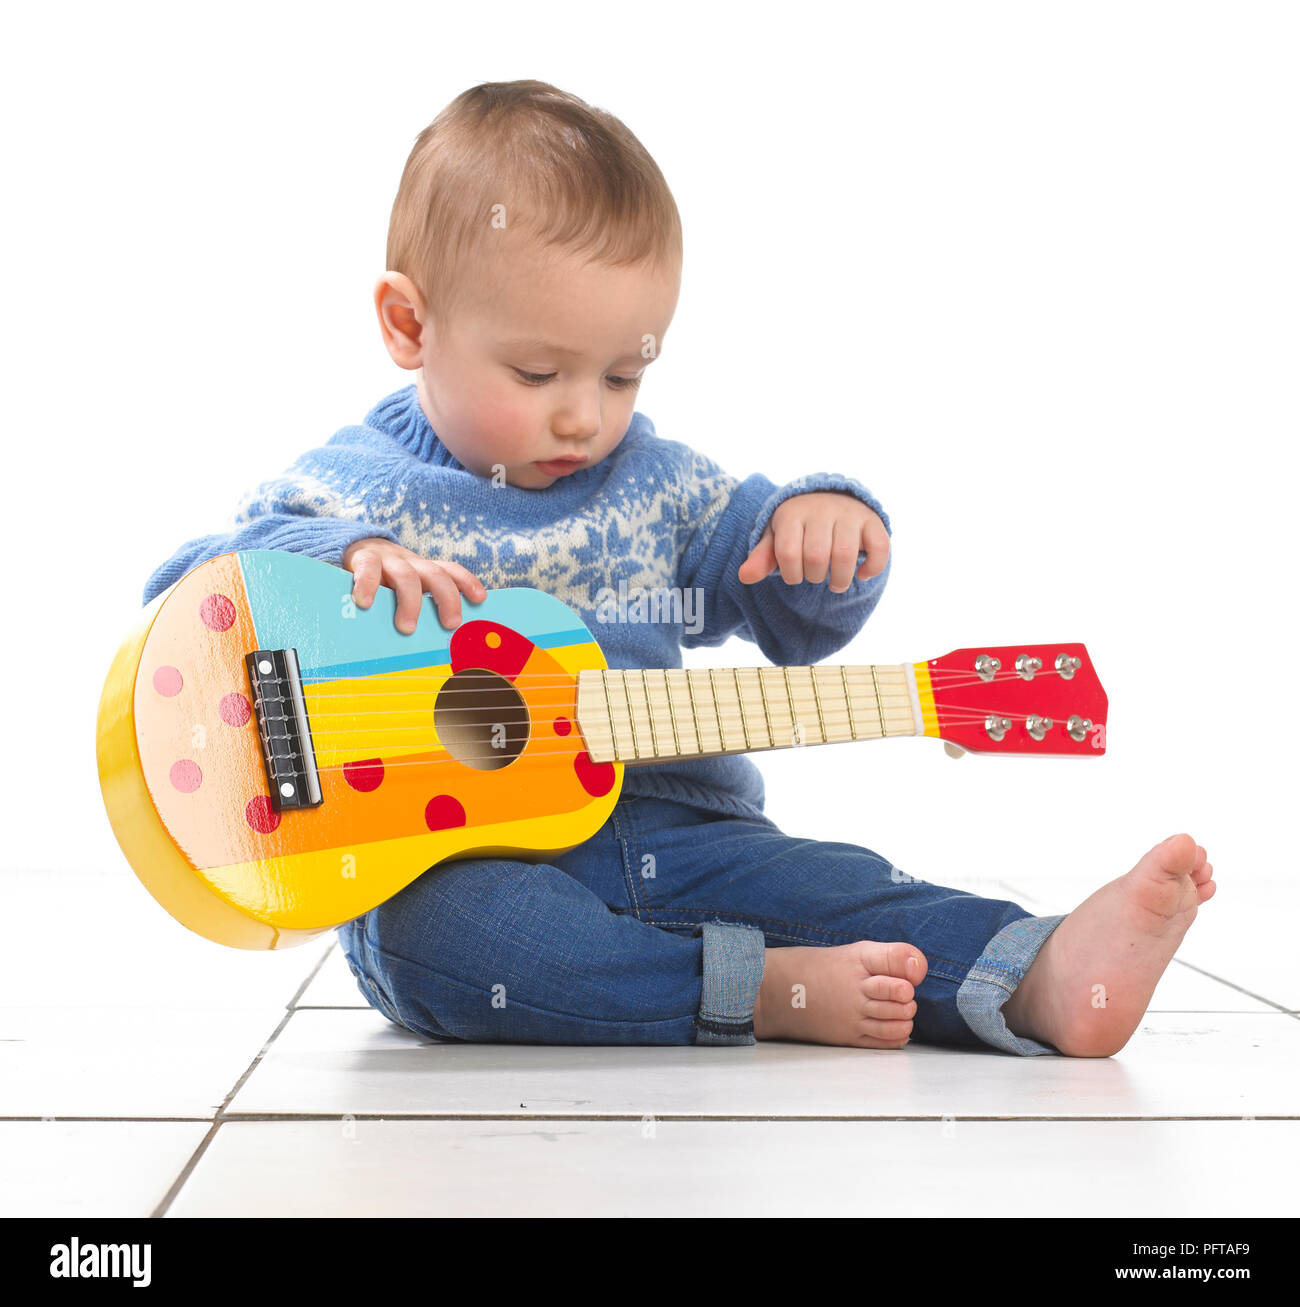 Baby boy (12.5 months) sitting playing toy guitar Stock Photo